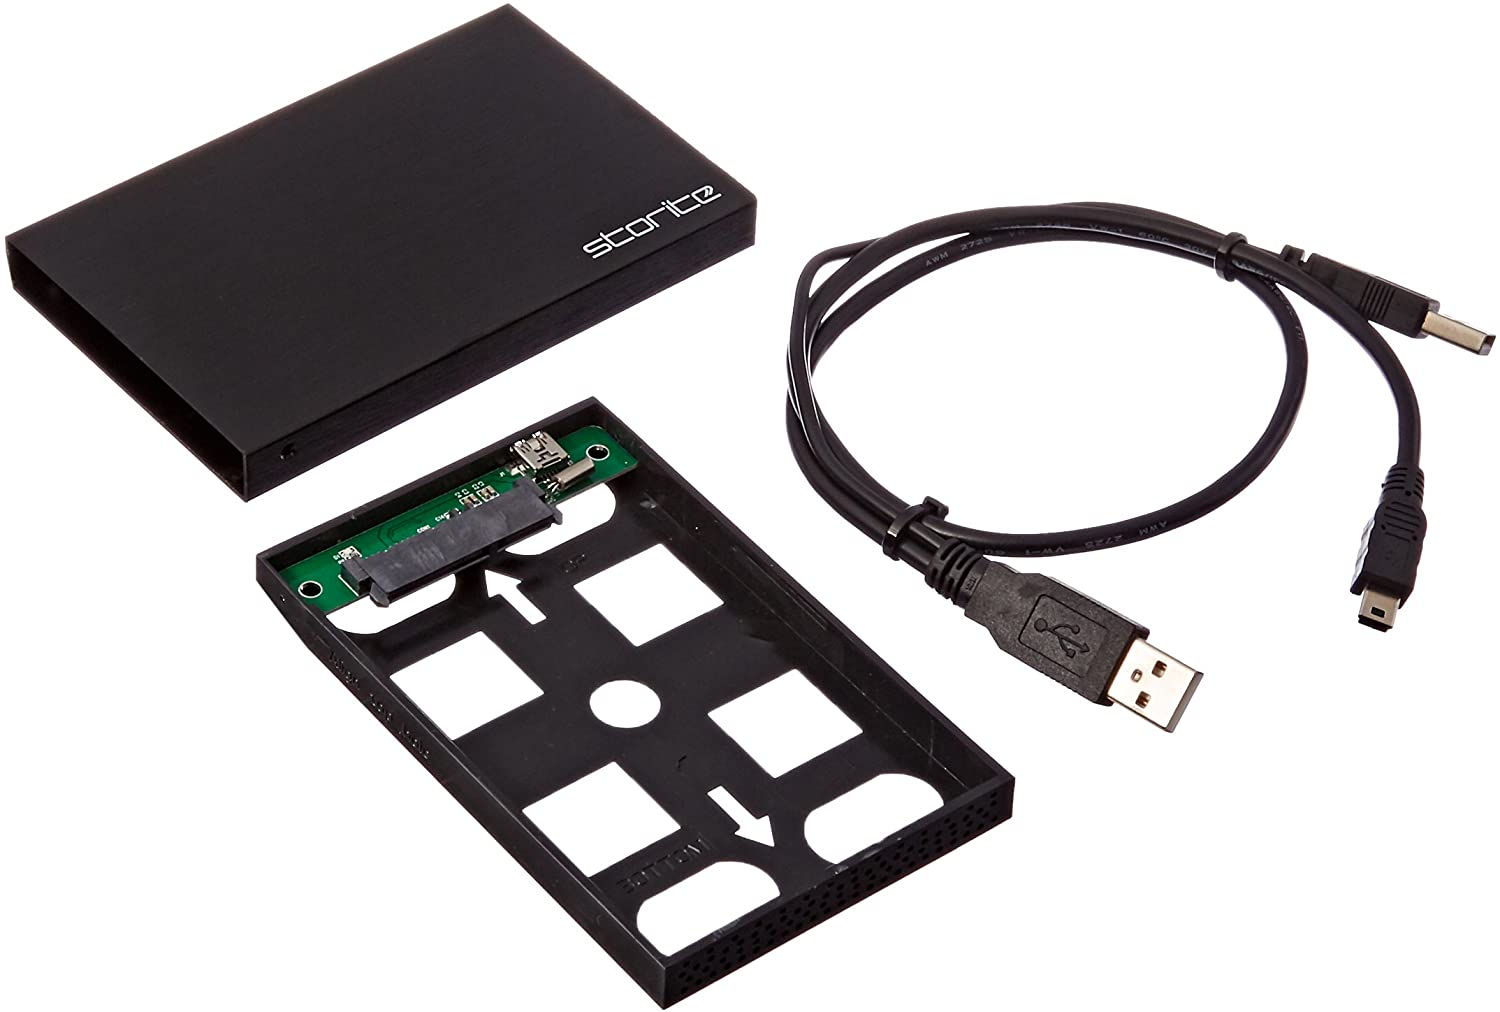 SSD cable and enclosure